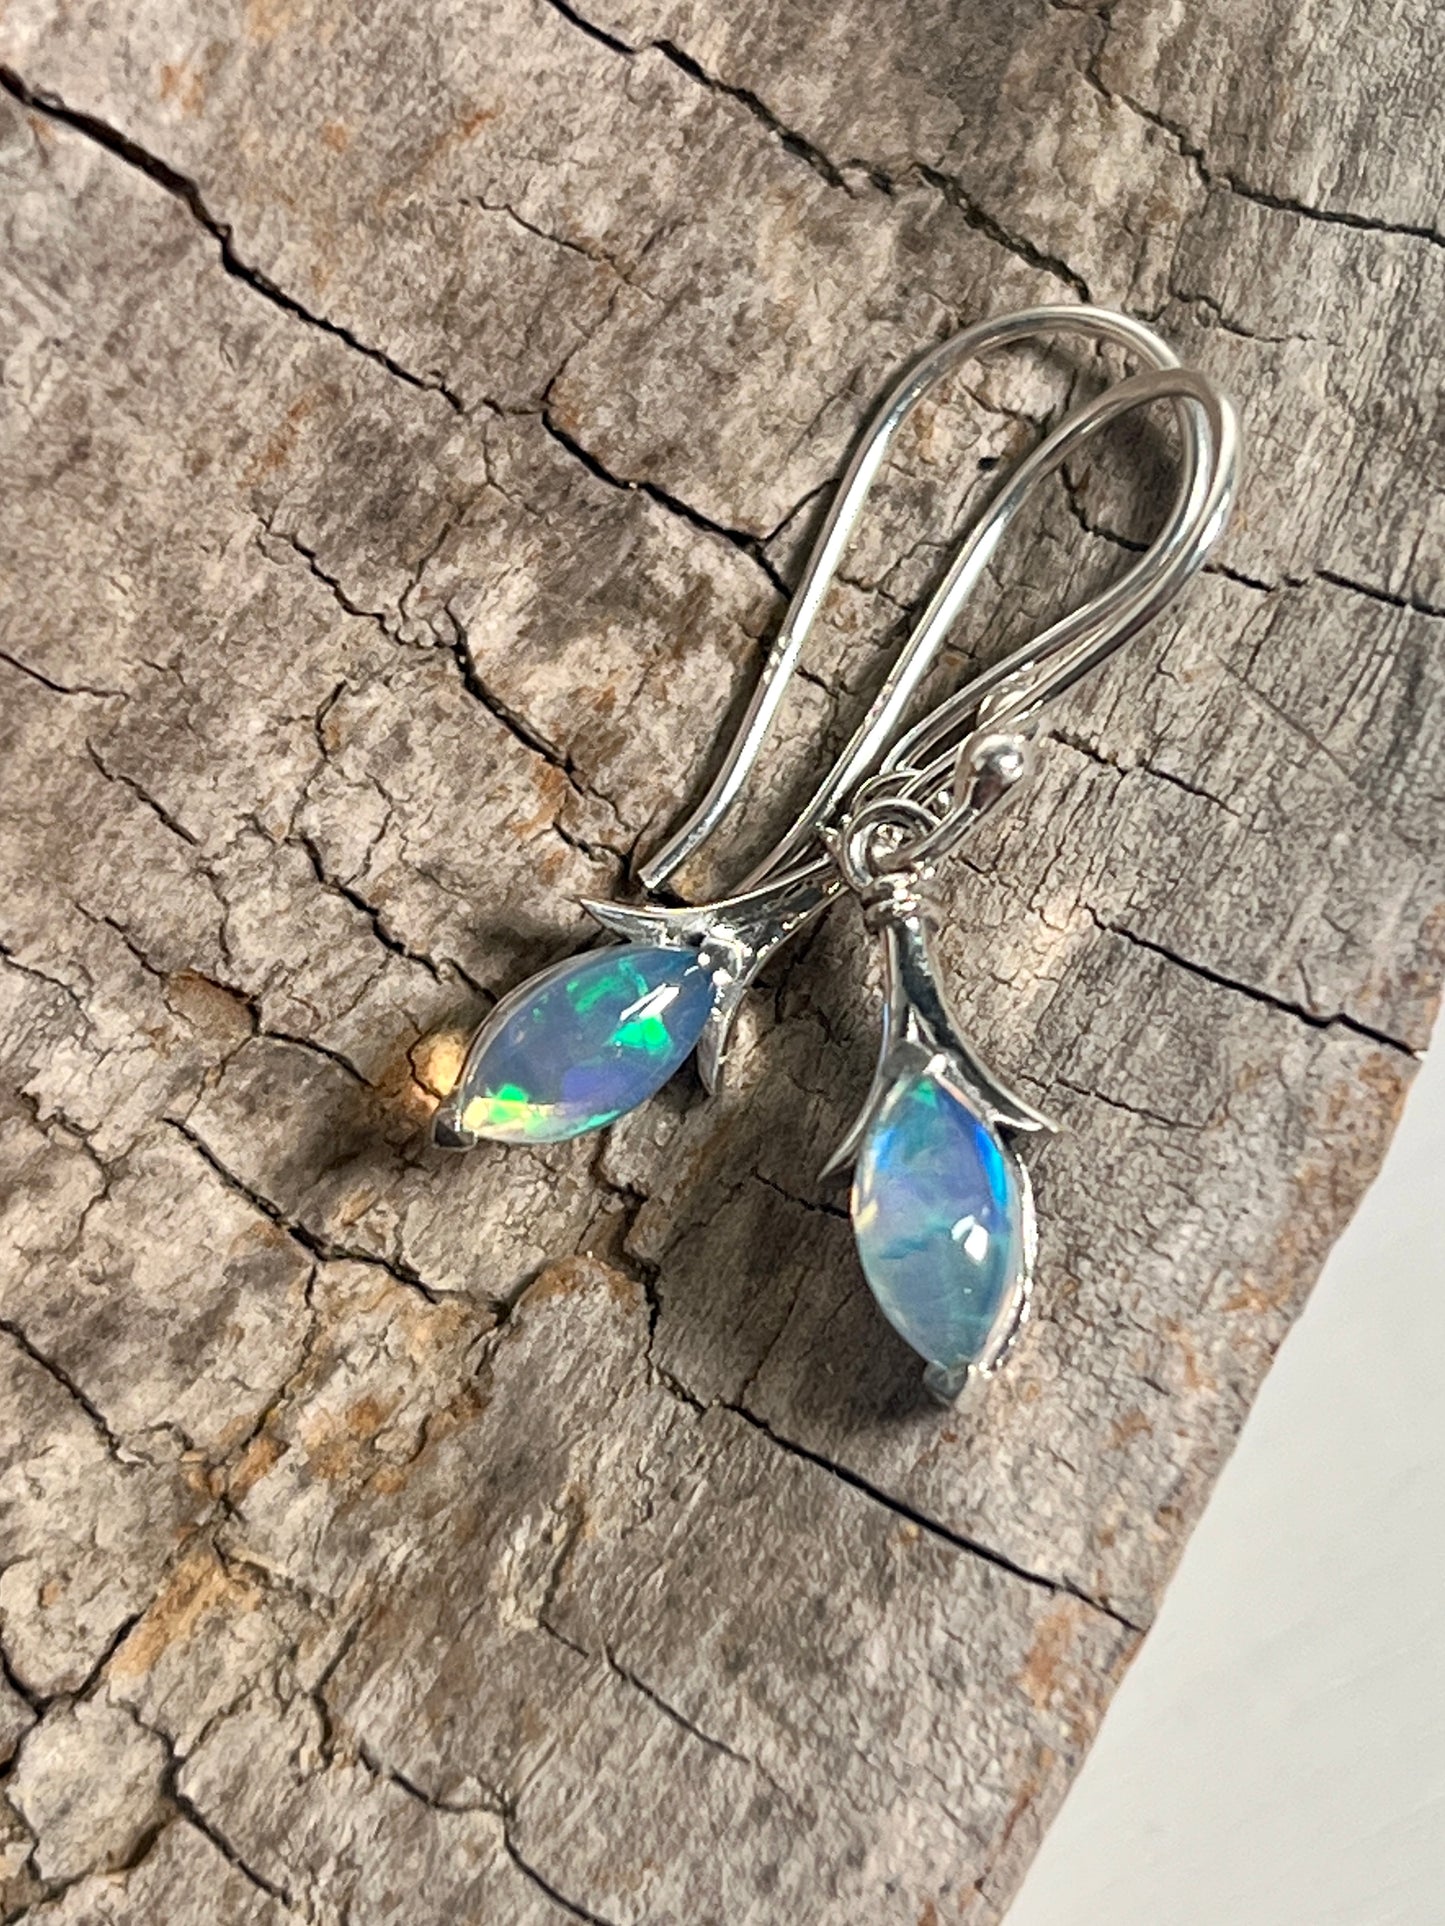 A pair of dainty Modern Marquise Shaped Ethiopian Opal earrings from Super Silver resting on a piece of wood.